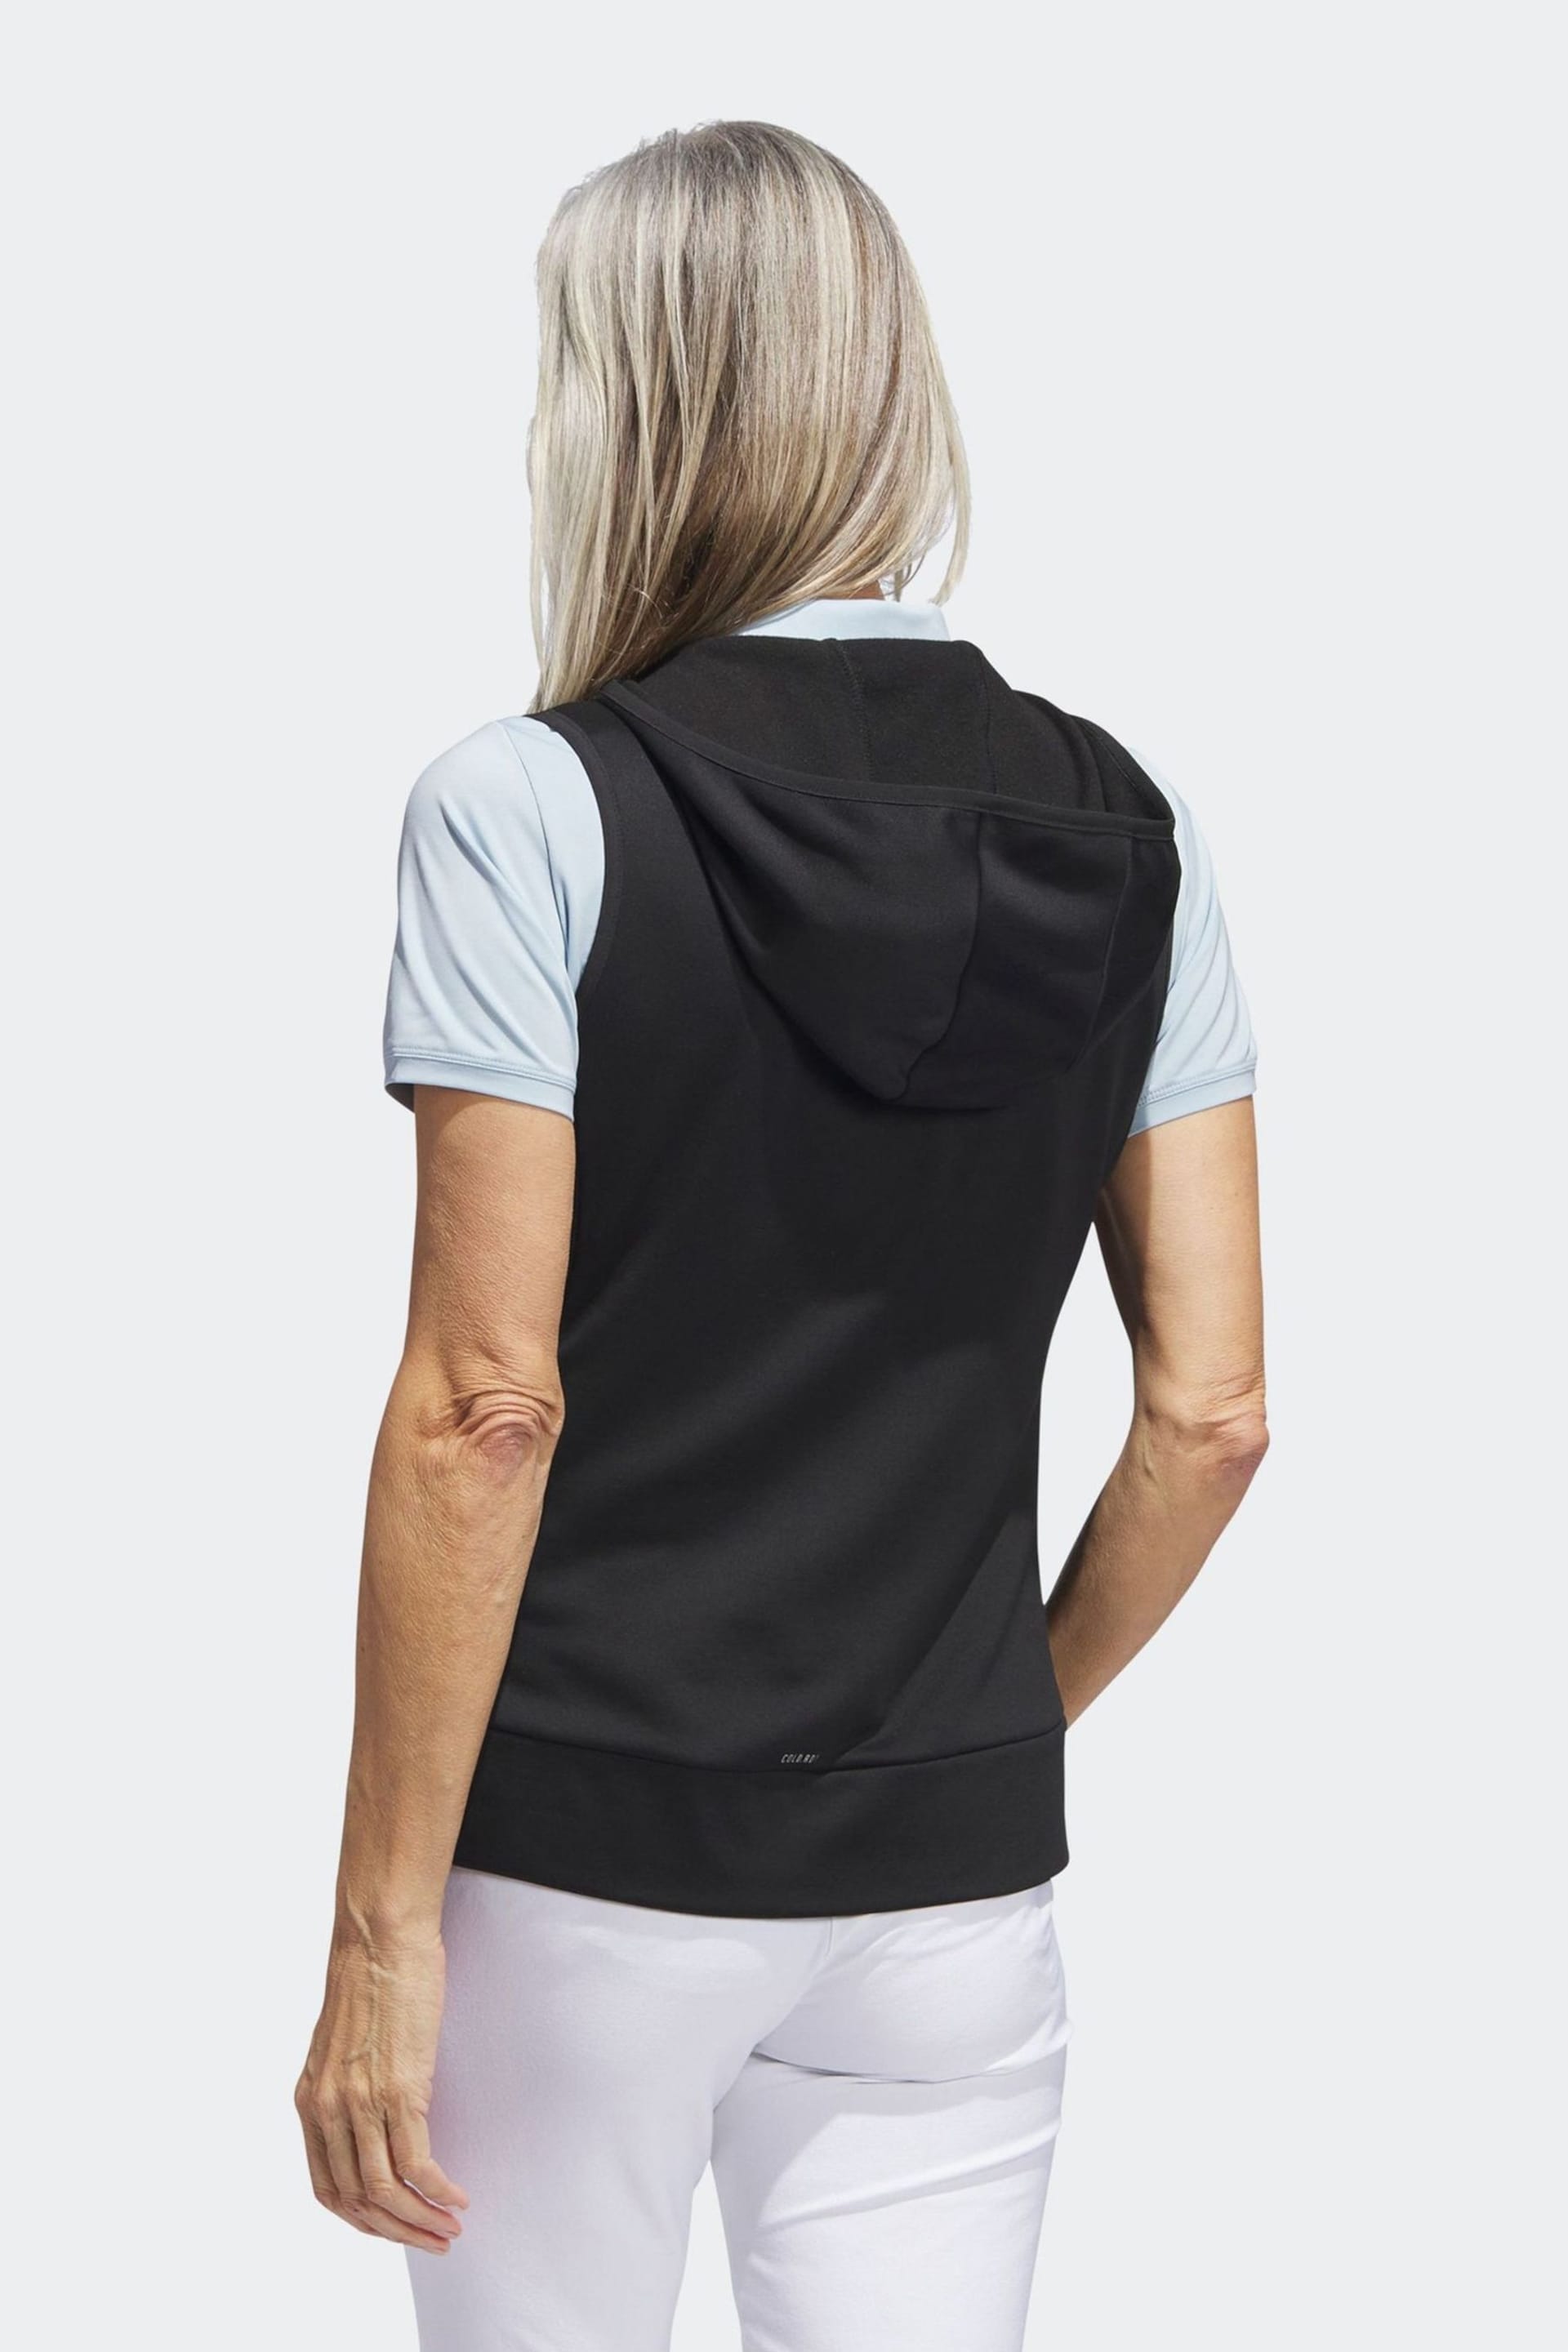 adidas Golf Black COLD.RDY Full-Zip Vest - Image 3 of 7